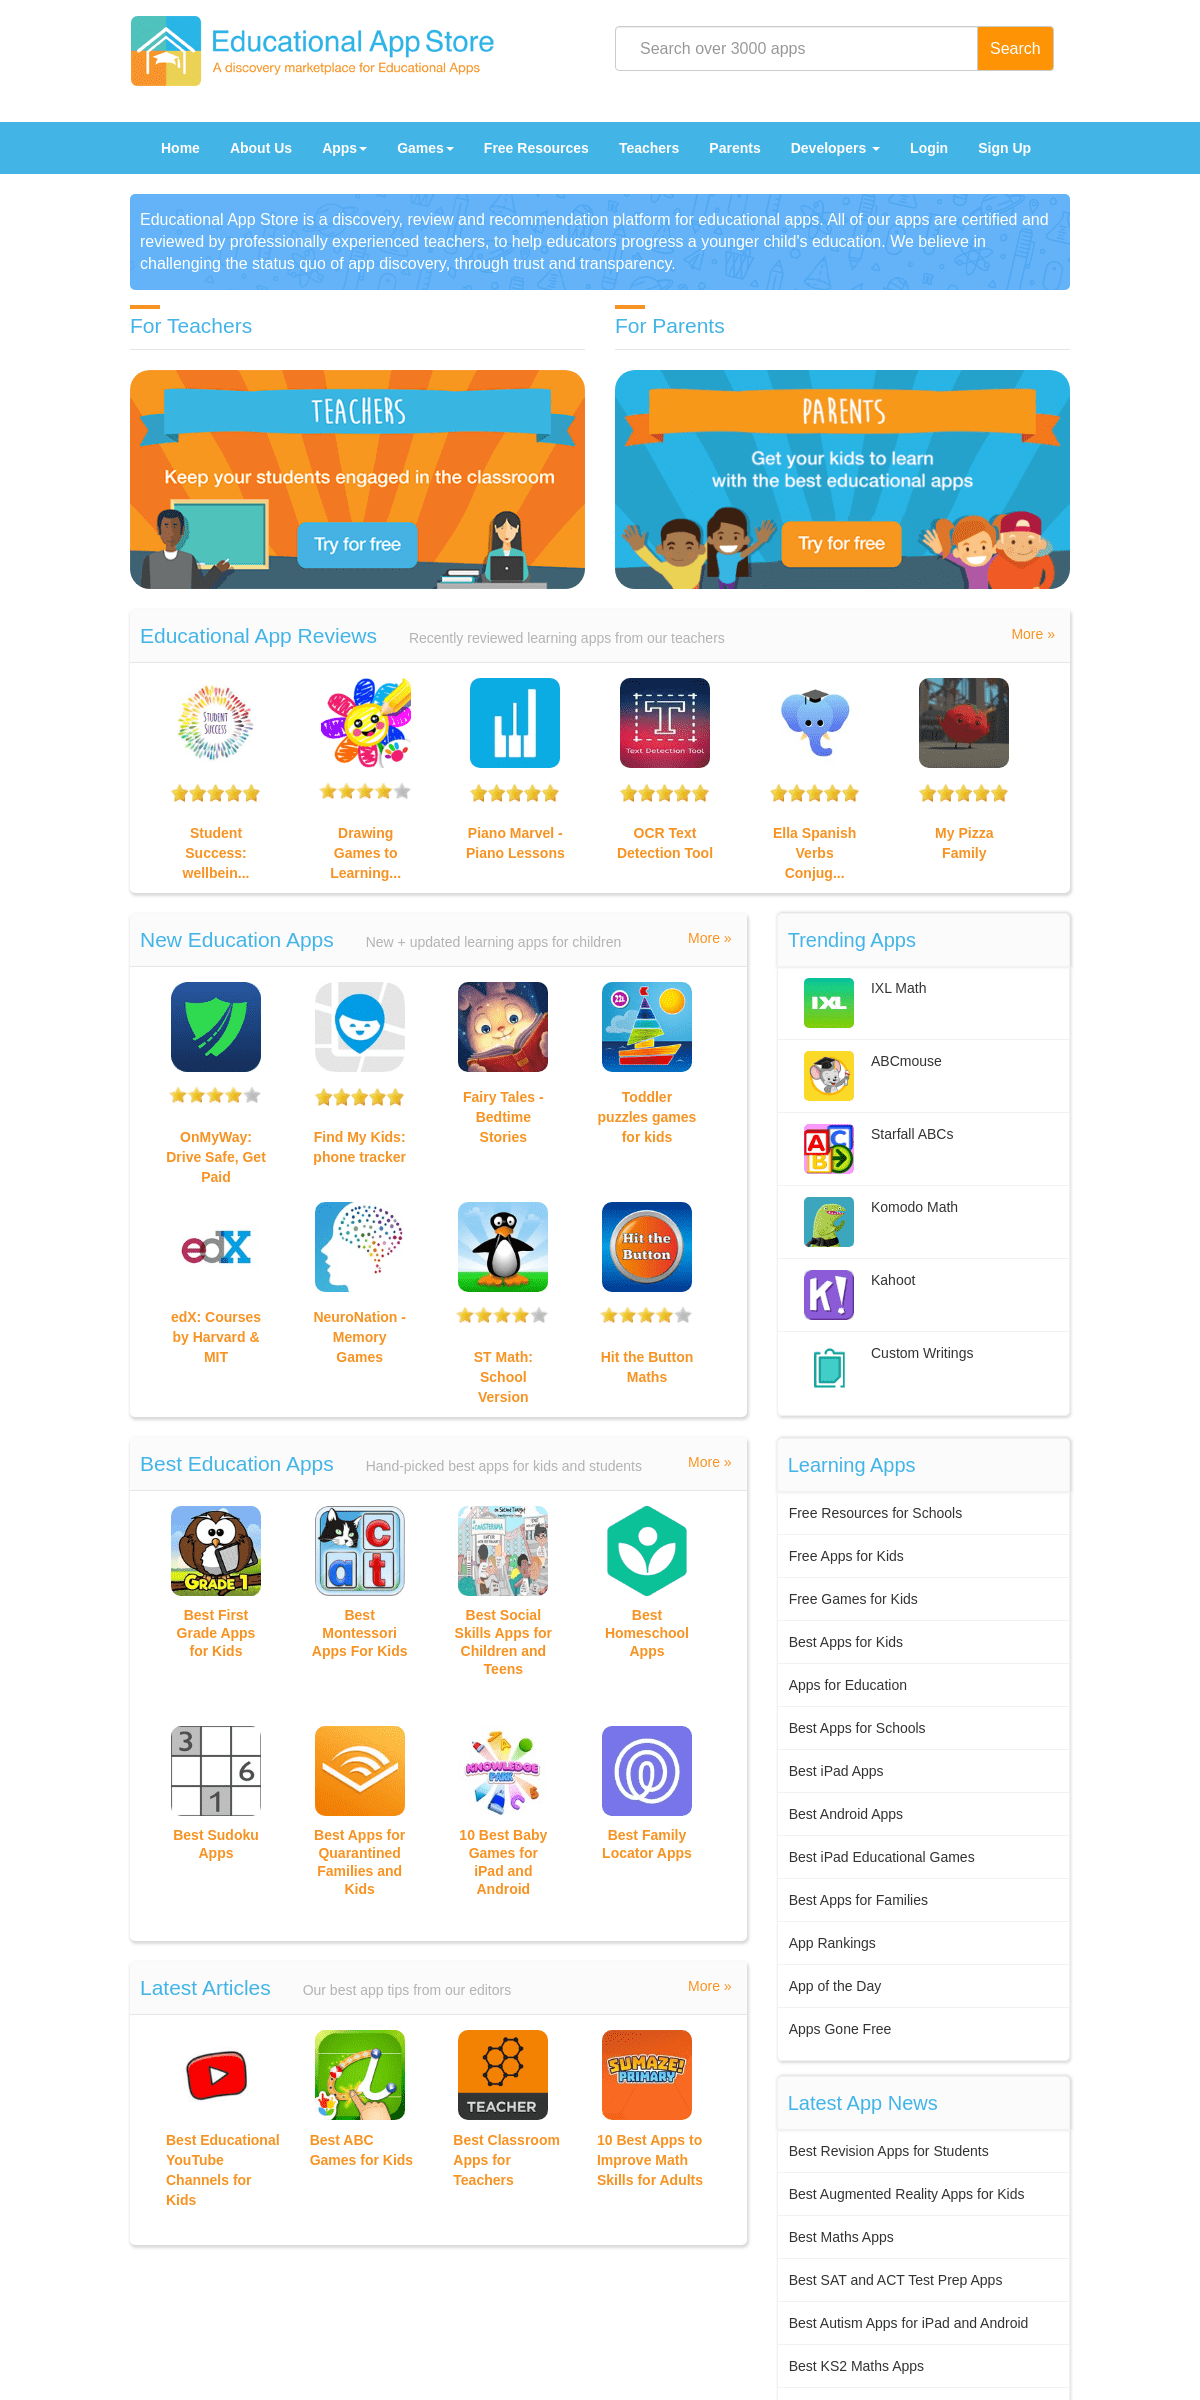 A complete backup of educationalappstore.com